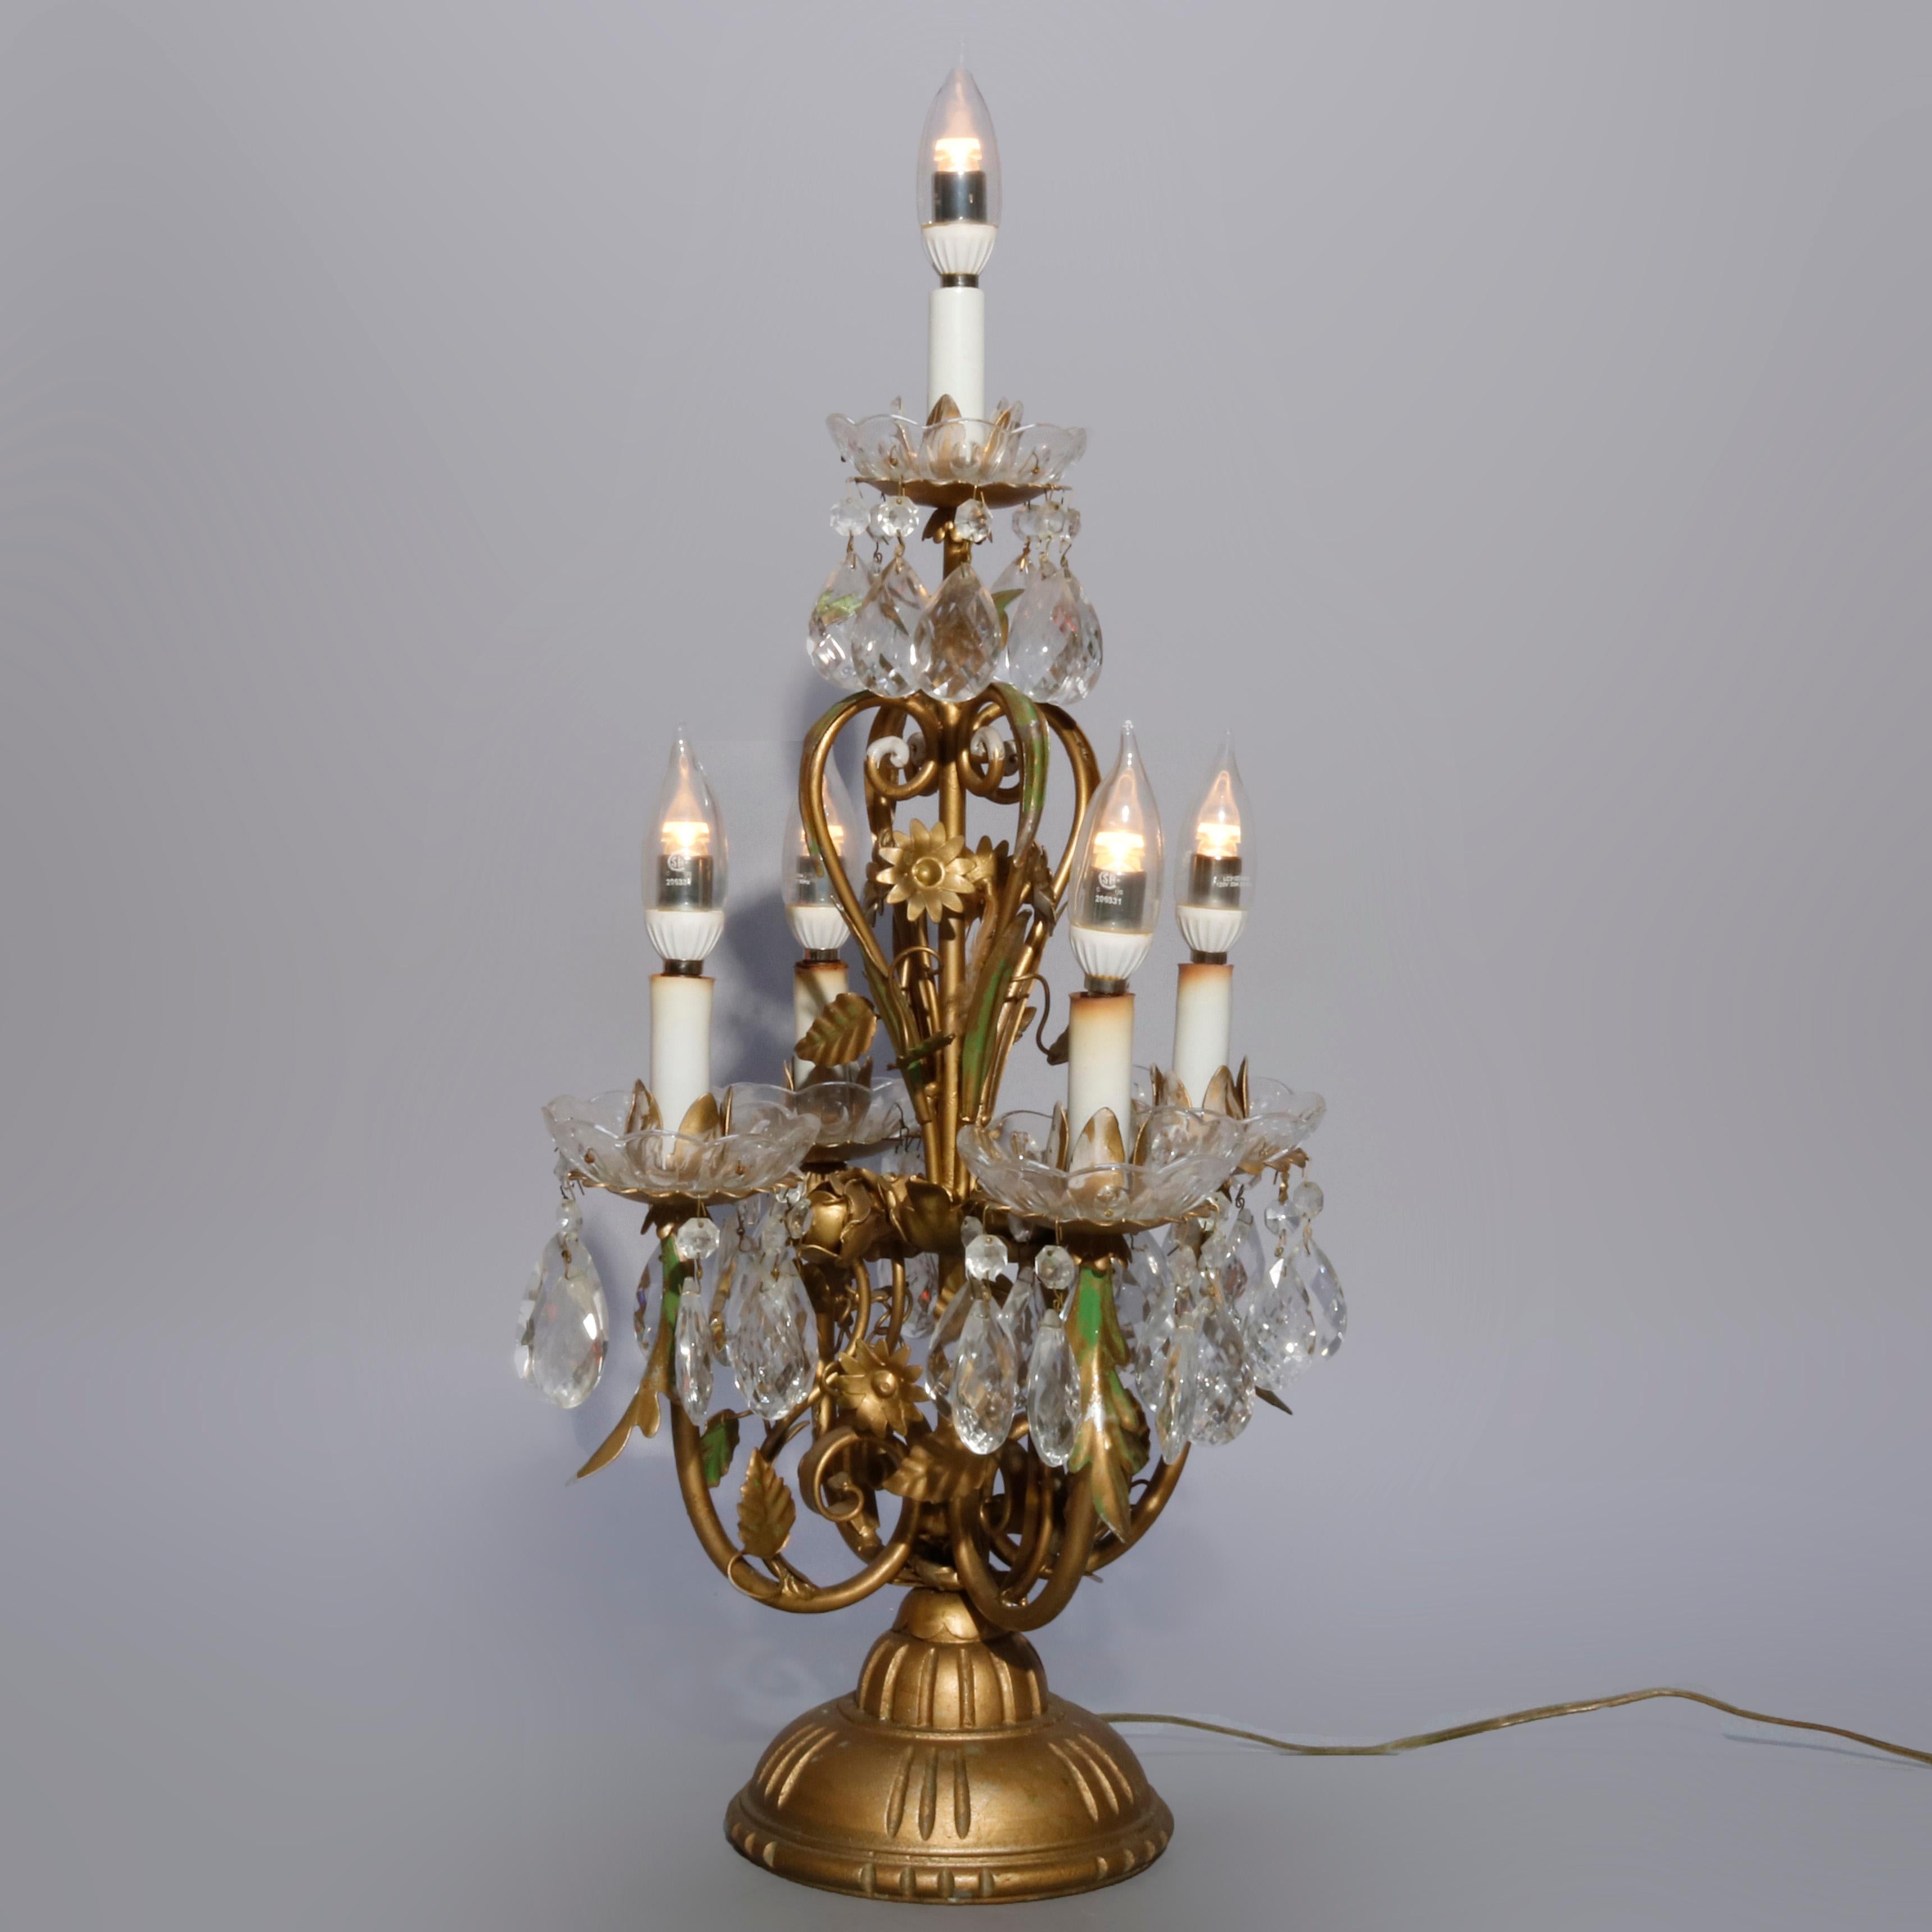 A vintage French candelabra table lamp offers brass frame with foliate and scroll arms and having hanging crystal prisms throughout, circa 1950

Measures: 26